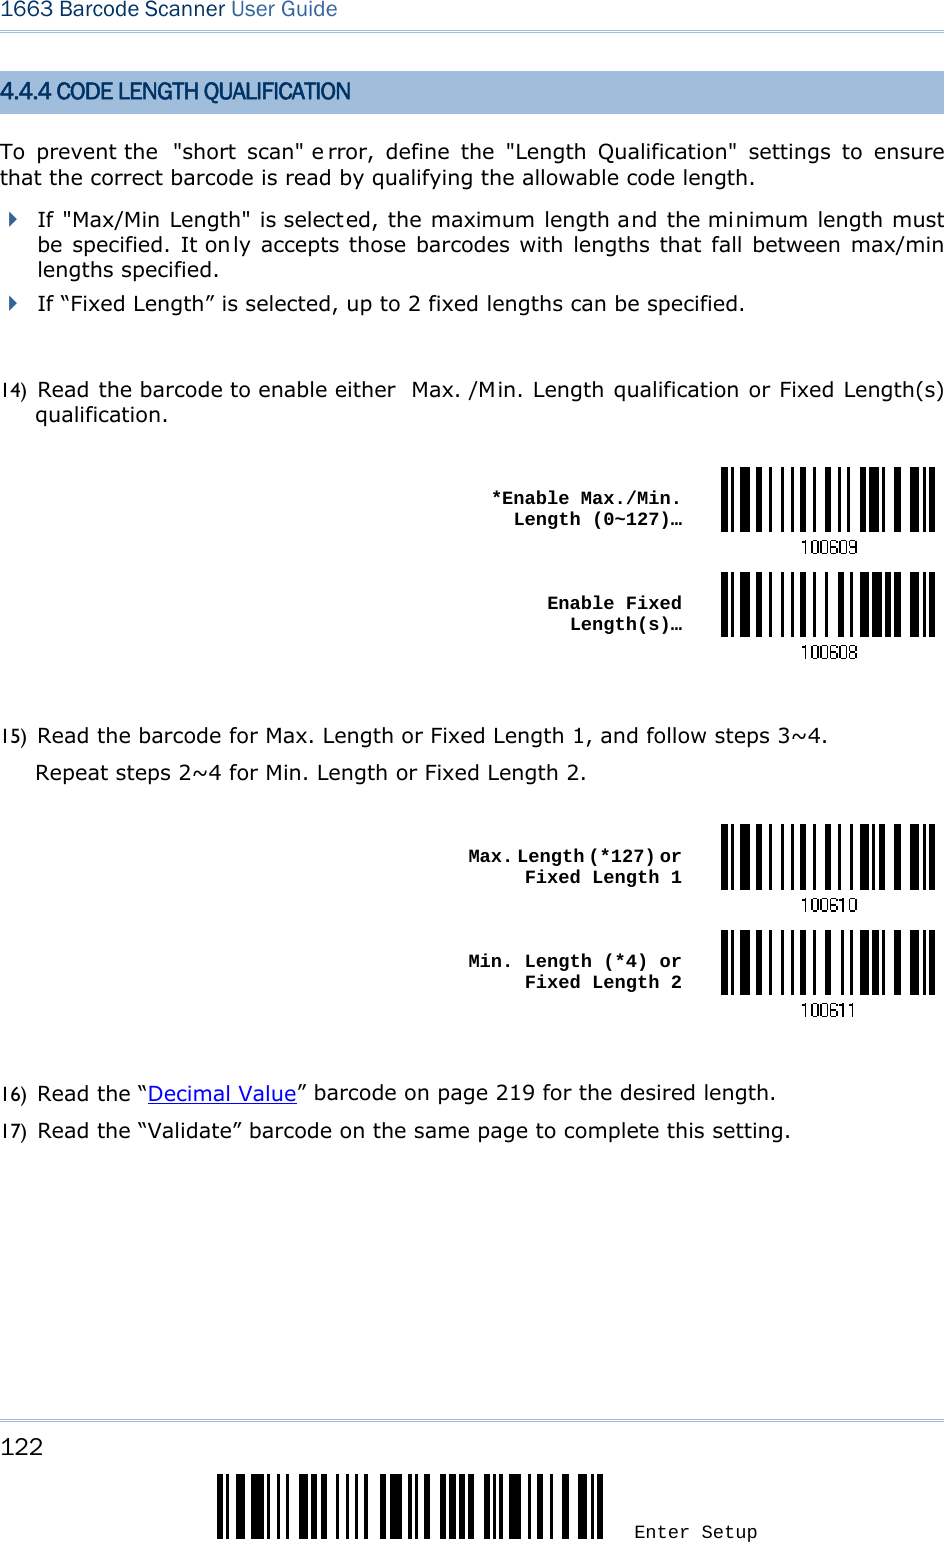 122 Enter Setup 1663 Barcode Scanner User Guide  4.4.4 CODE LENGTH QUALIFICATION To prevent the  &quot;short scan&quot; e rror, define the &quot;Length Qualification&quot; settings to ensure that the correct barcode is read by qualifying the allowable code length.  If &quot;Max/Min Length&quot; is selected, the maximum length and the minimum length must be specified. It on ly accepts those barcodes with lengths that fall between max/min lengths specified.  If “Fixed Length” is selected, up to 2 fixed lengths can be specified.  14) Read the barcode to enable either  Max. /Min. Length qualification or Fixed Length(s) qualification.   *Enable Max./Min. Length (0~127)… Enable Fixed Length(s)… 15) Read the barcode for Max. Length or Fixed Length 1, and follow steps 3~4. Repeat steps 2~4 for Min. Length or Fixed Length 2.   Max. Length (*127) or Fixed Length 1 Min. Length (*4) or Fixed Length 2 16) Read the “Decimal Value” barcode on page 219 for the desired length.   17) Read the “Validate” barcode on the same page to complete this setting.    